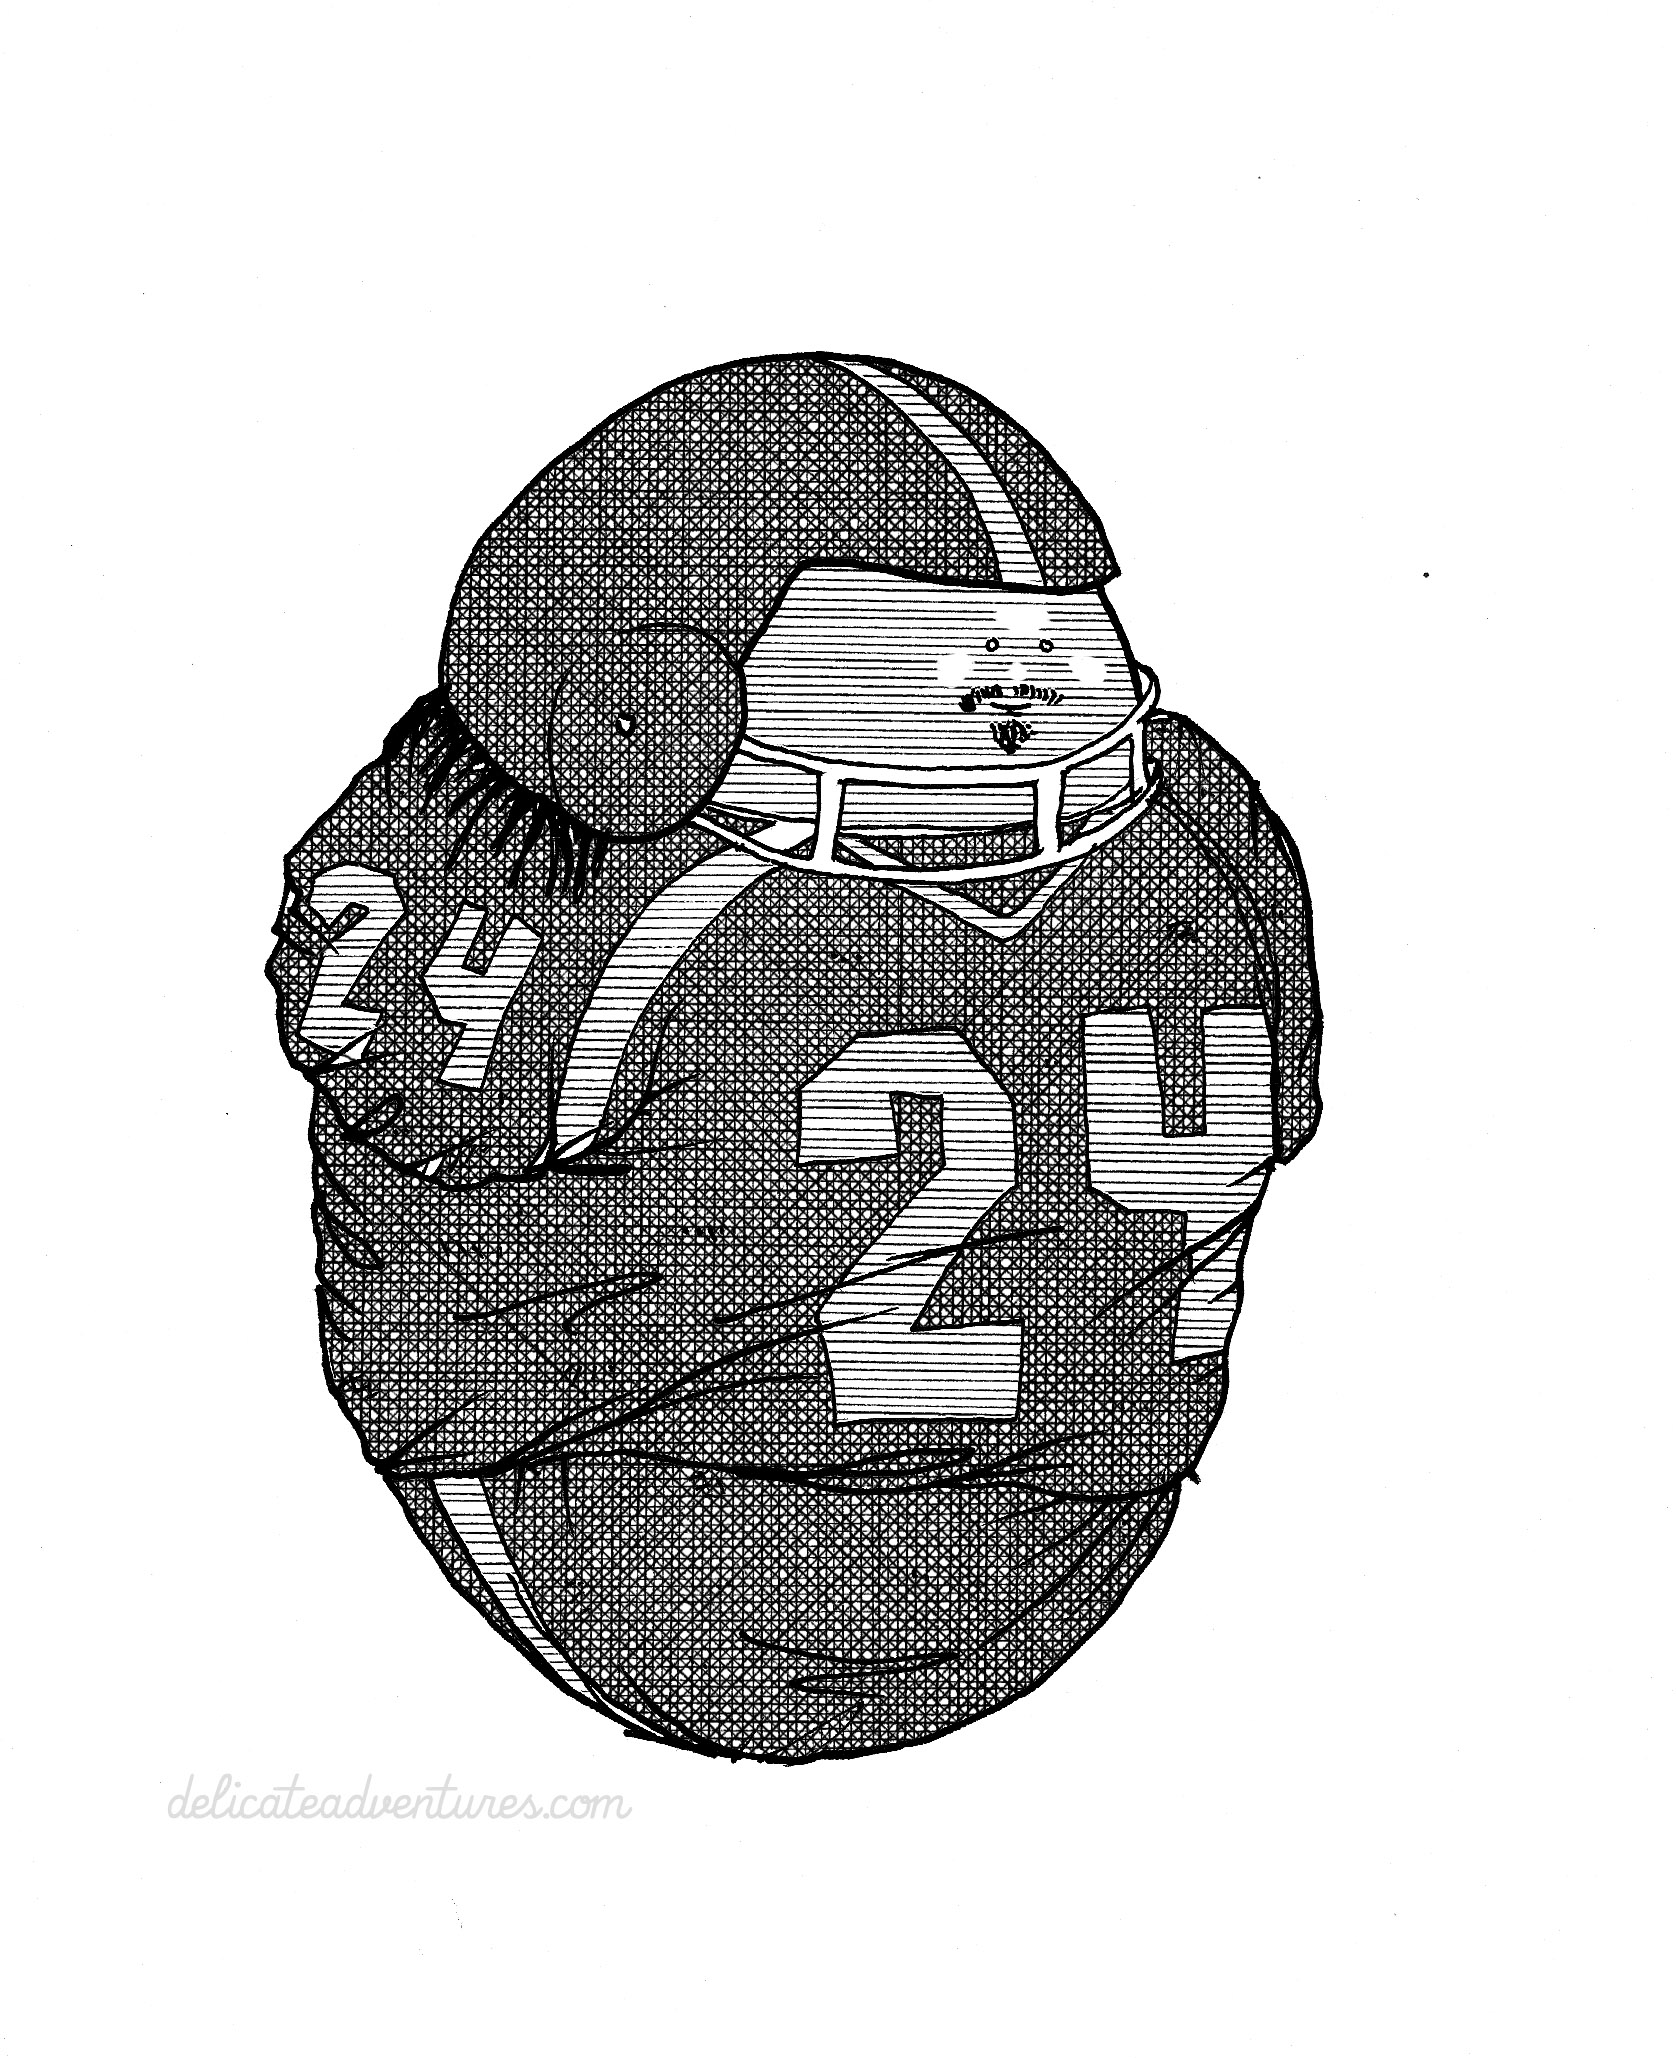 Marshawn Lynch Sketch At Explore Collection Of Marshawn Lynch Sketch 2459